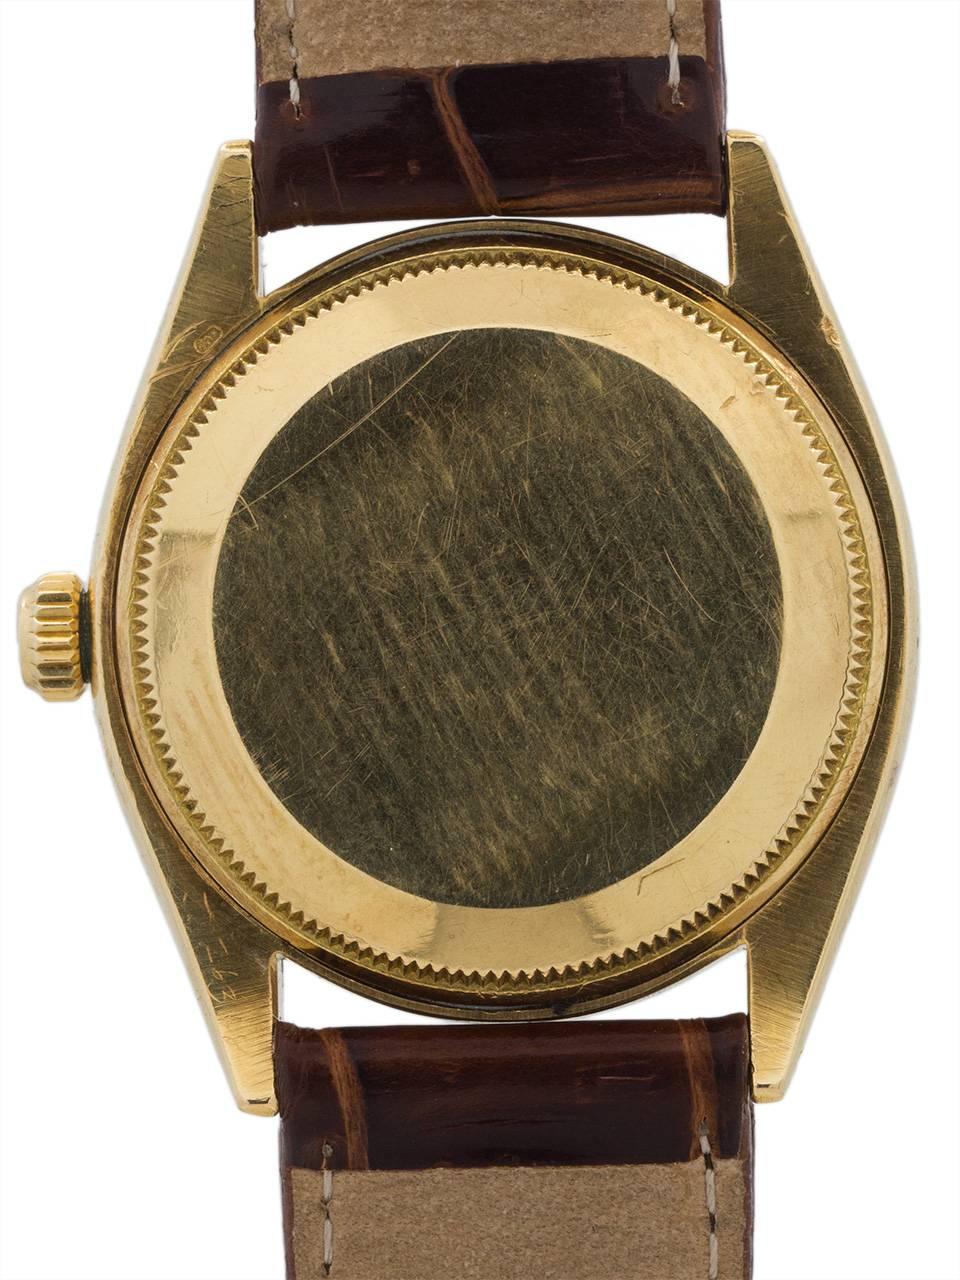 Modern Rolex Yellow Gold Oyster Perpetual Model 6569, circa 1956